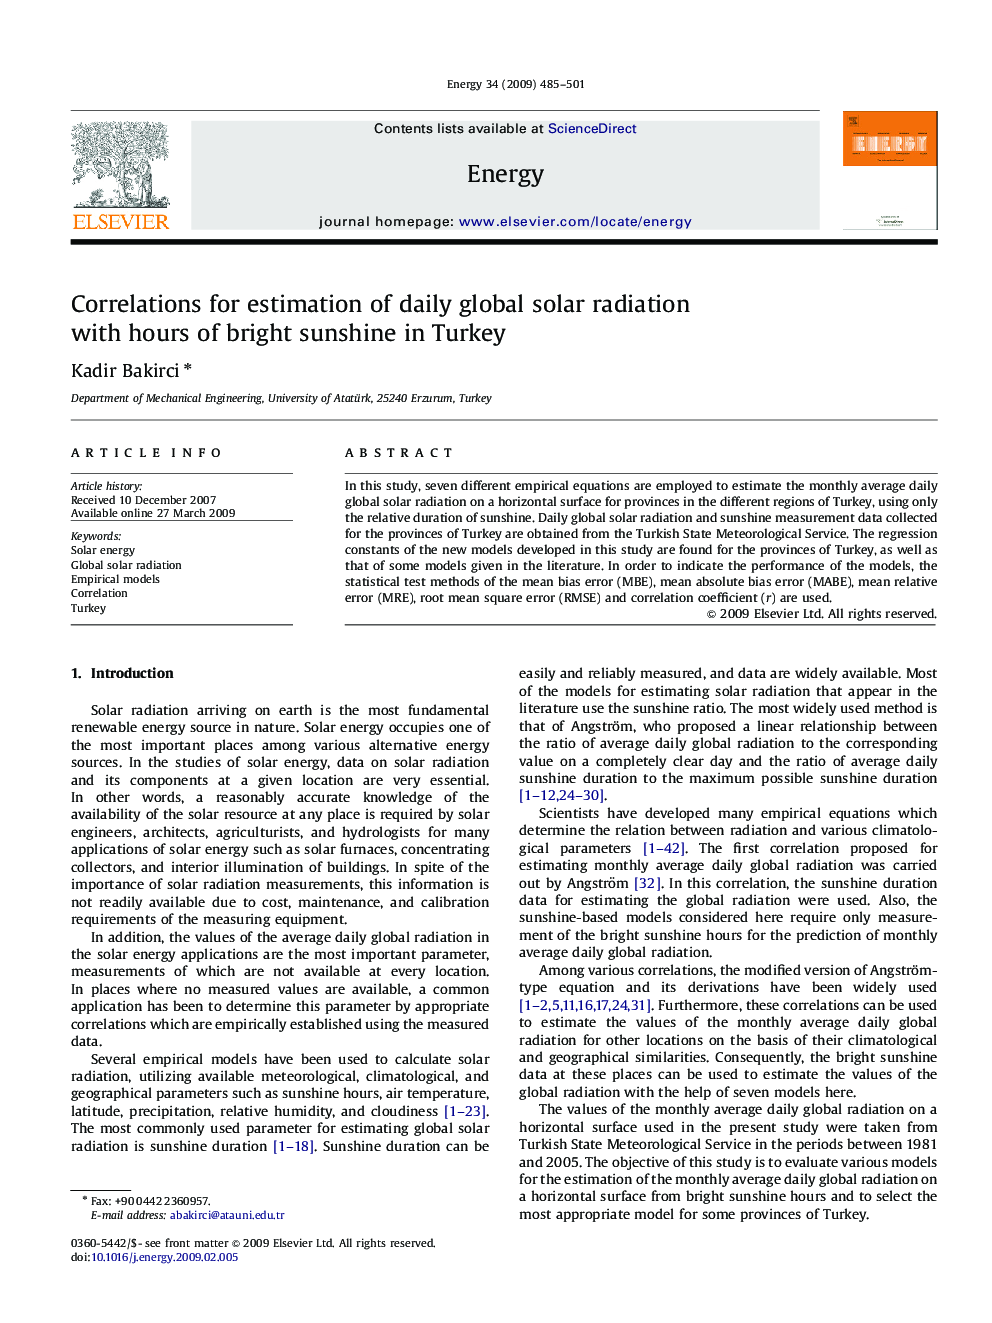 Correlations for estimation of daily global solar radiation with hours of bright sunshine in Turkey